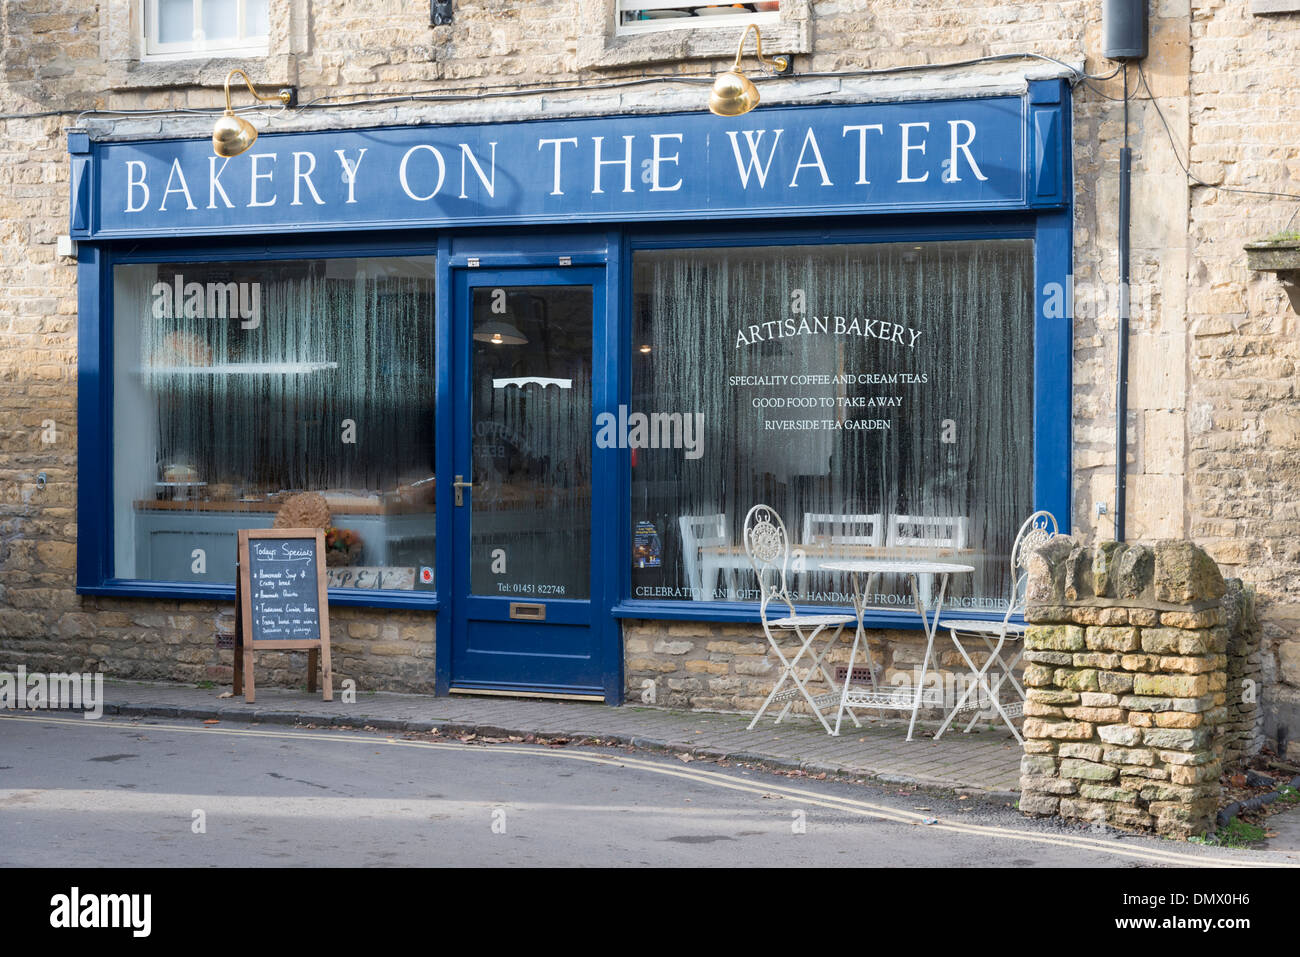 The Bakery on the Water, an artisan bakers shop in Bourton on the Water, the Cotswolds UK Stock Photo